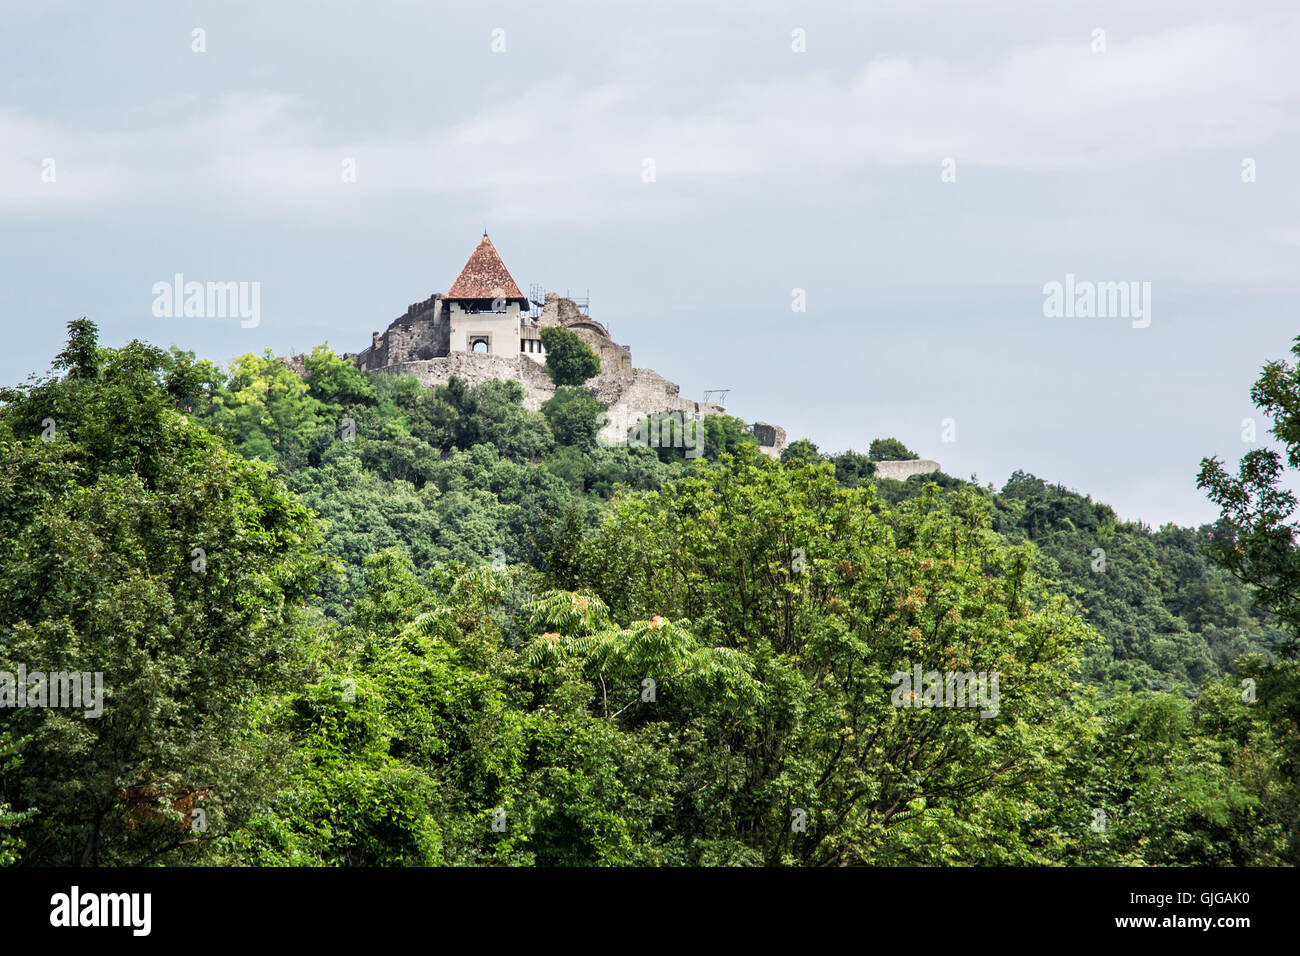 Ruin castle of Visegrad, Hungary. Ancient architecture and greenery. Travel destination. Cultural heritage. Stock Photo